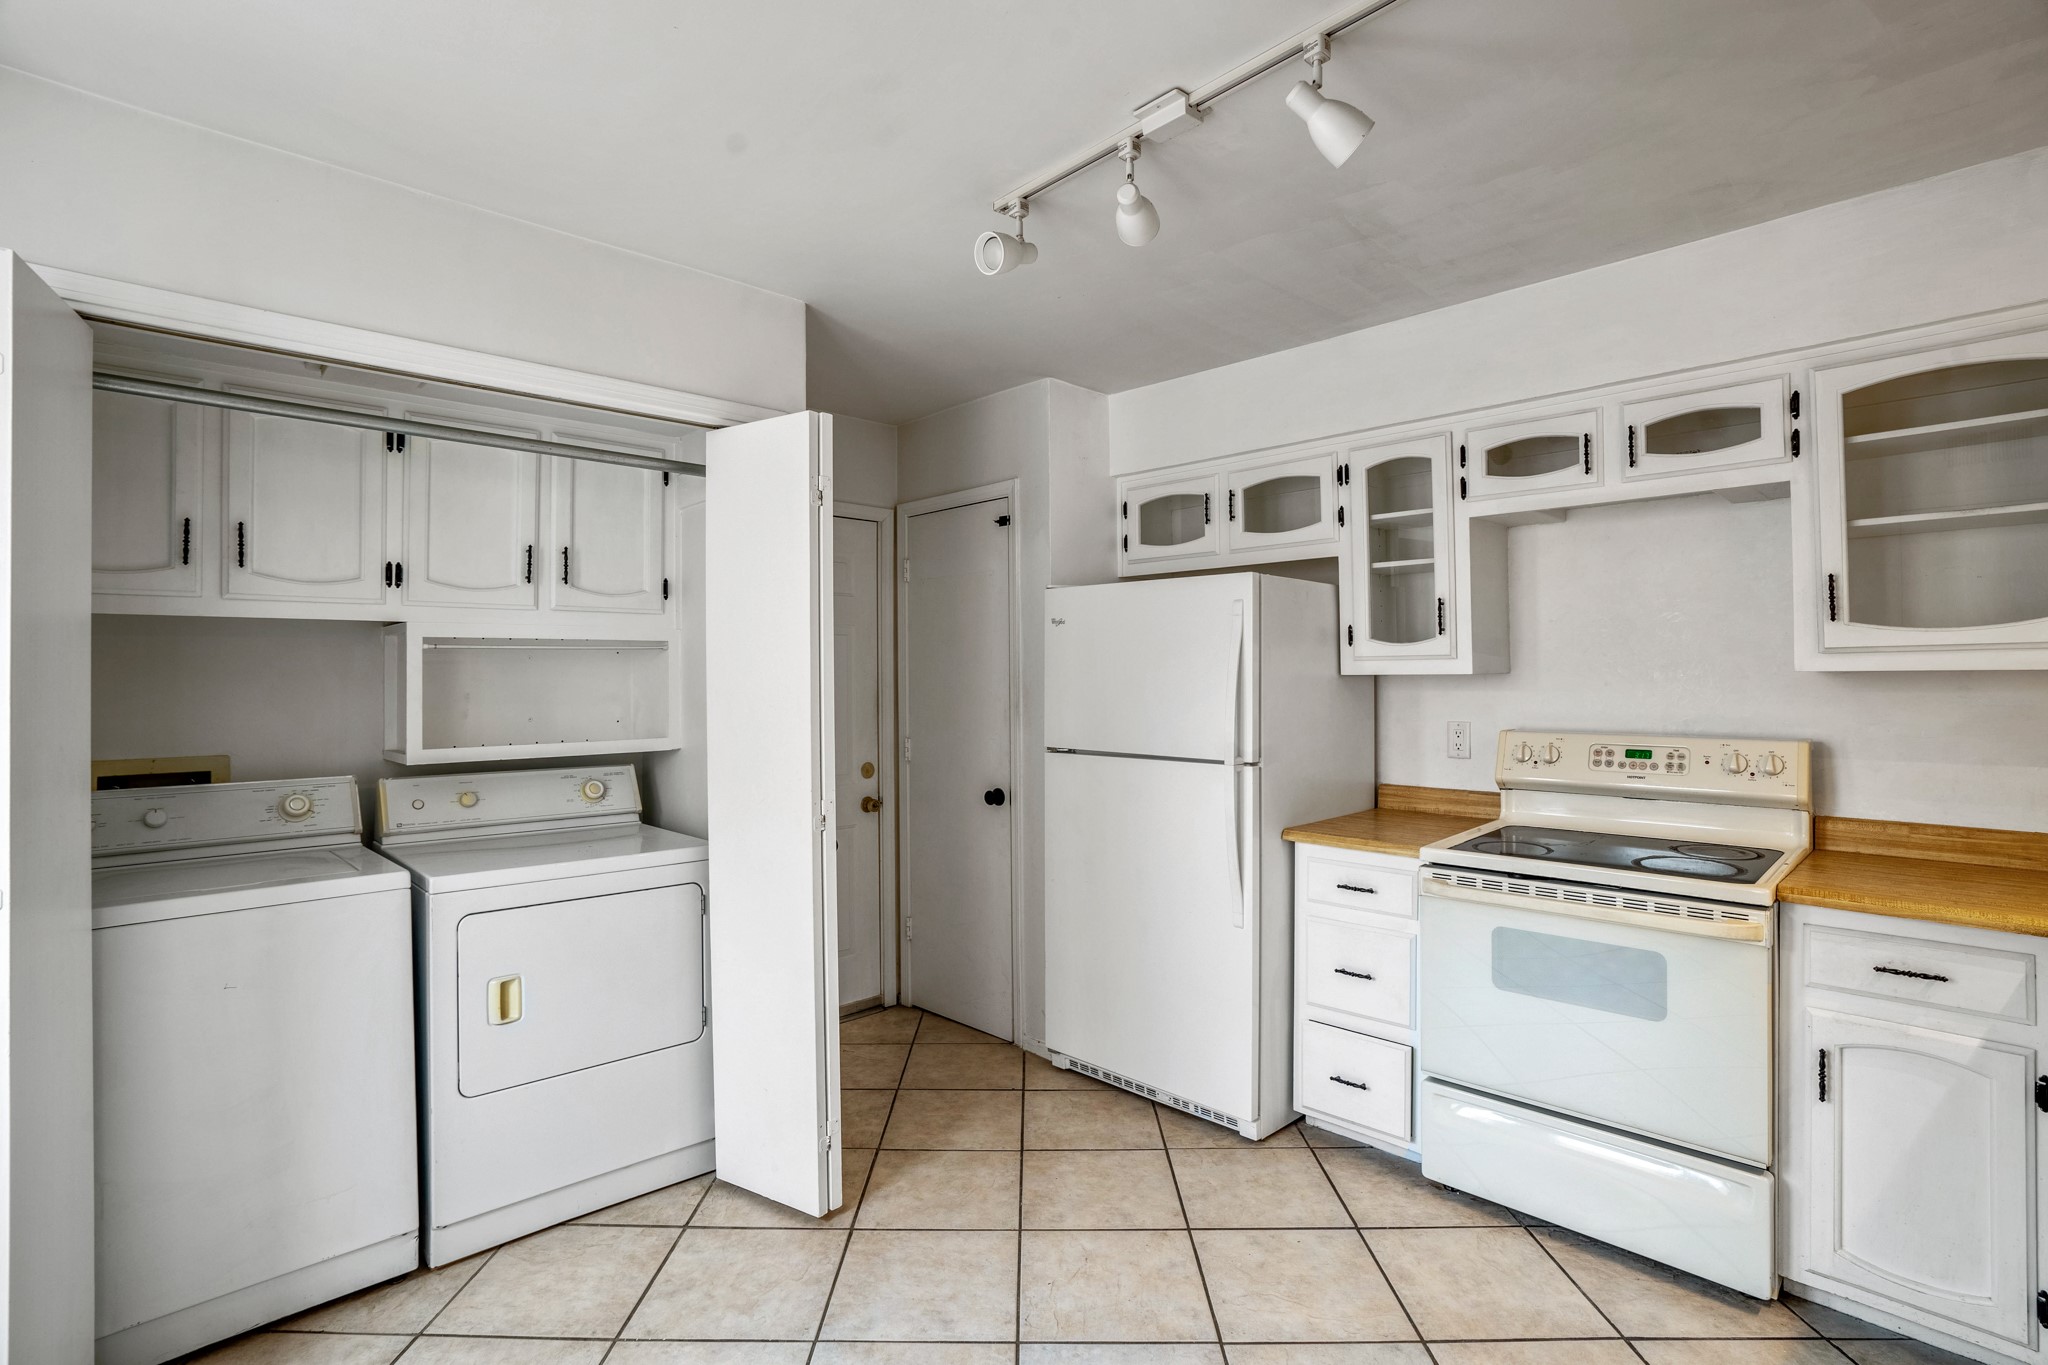 Kitchen with Laundry Area